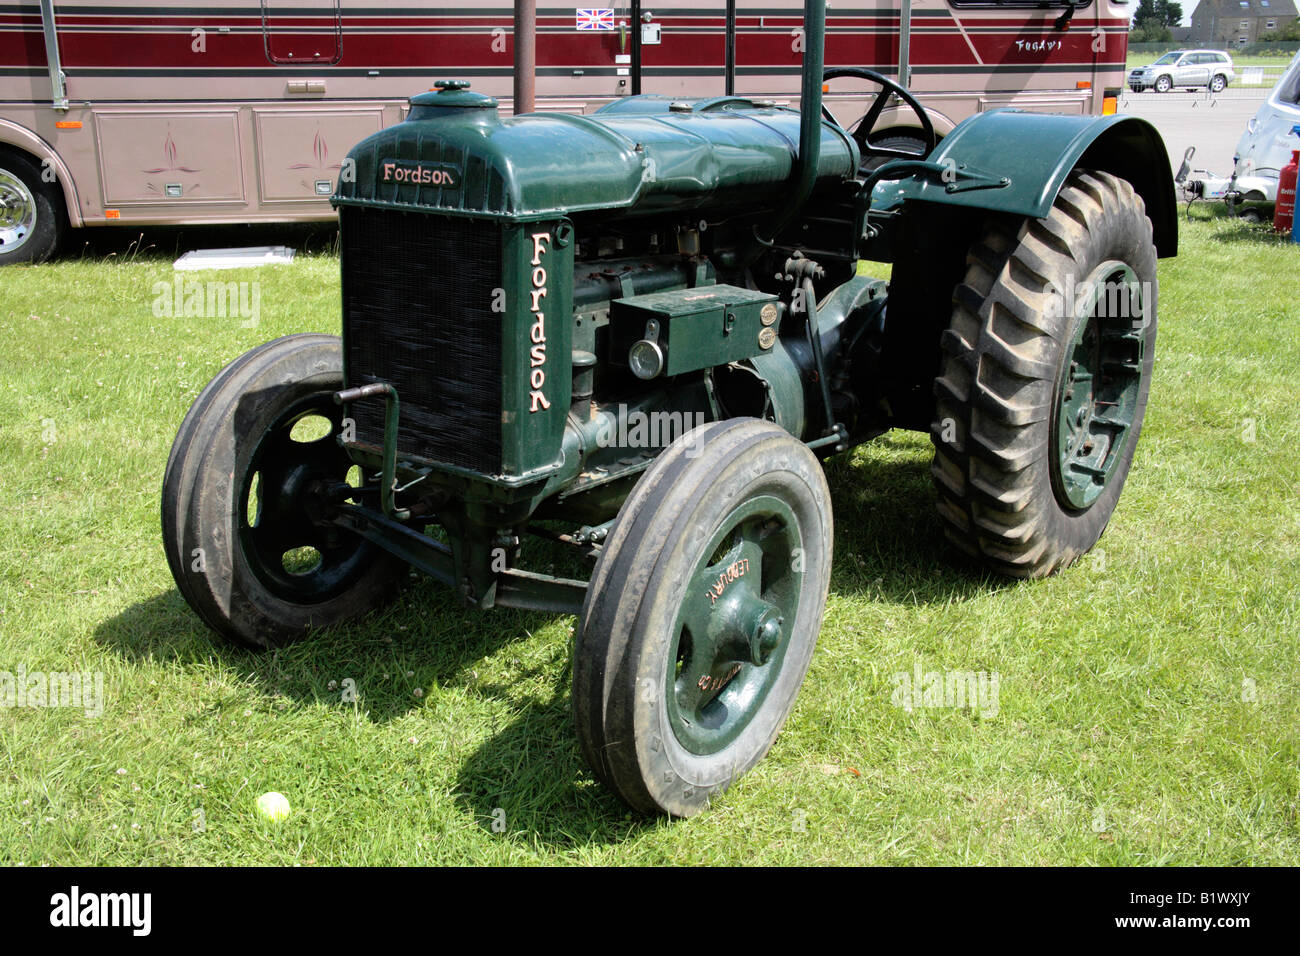 Fordson Tractor Stock Photo